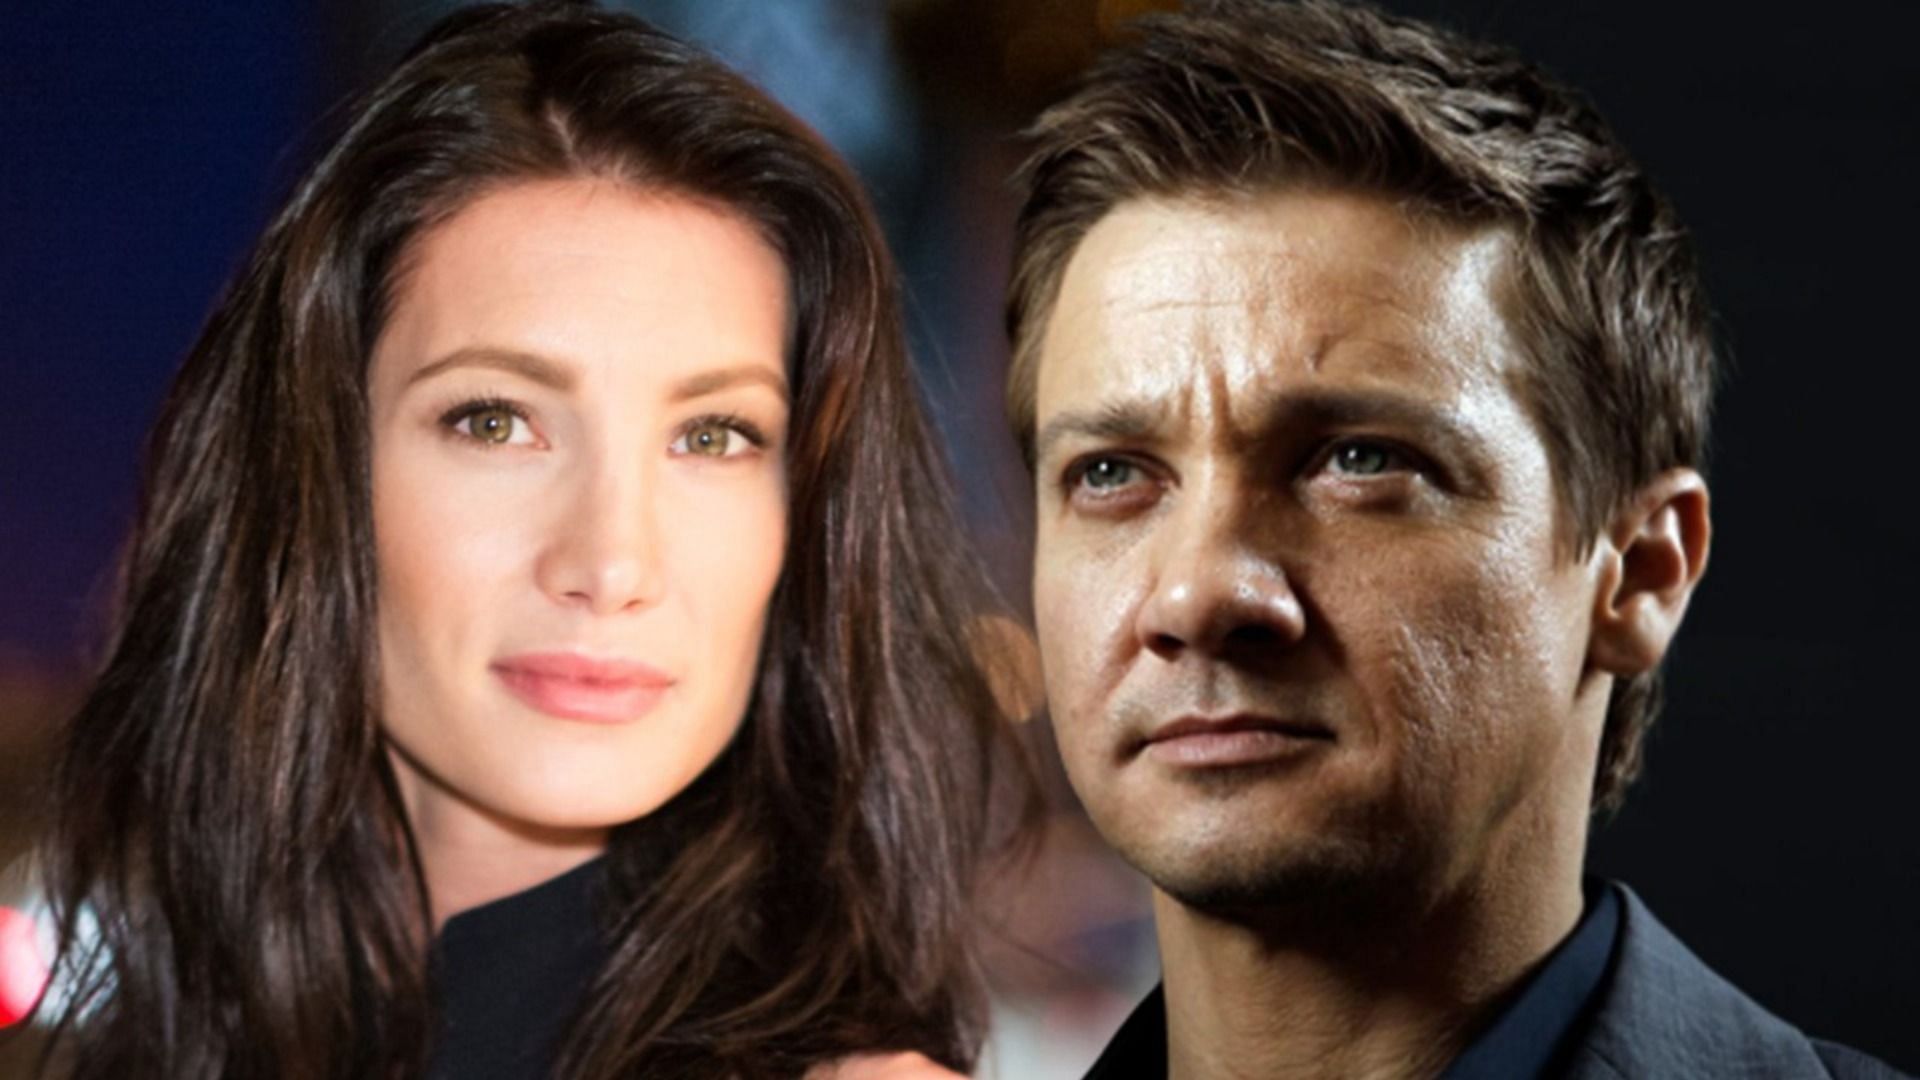 Jeremy Renner has stated that the abuse allegations made by ex-wife Sonni Pacheco are &quot;nonsense&quot; (Image via Getty Images)